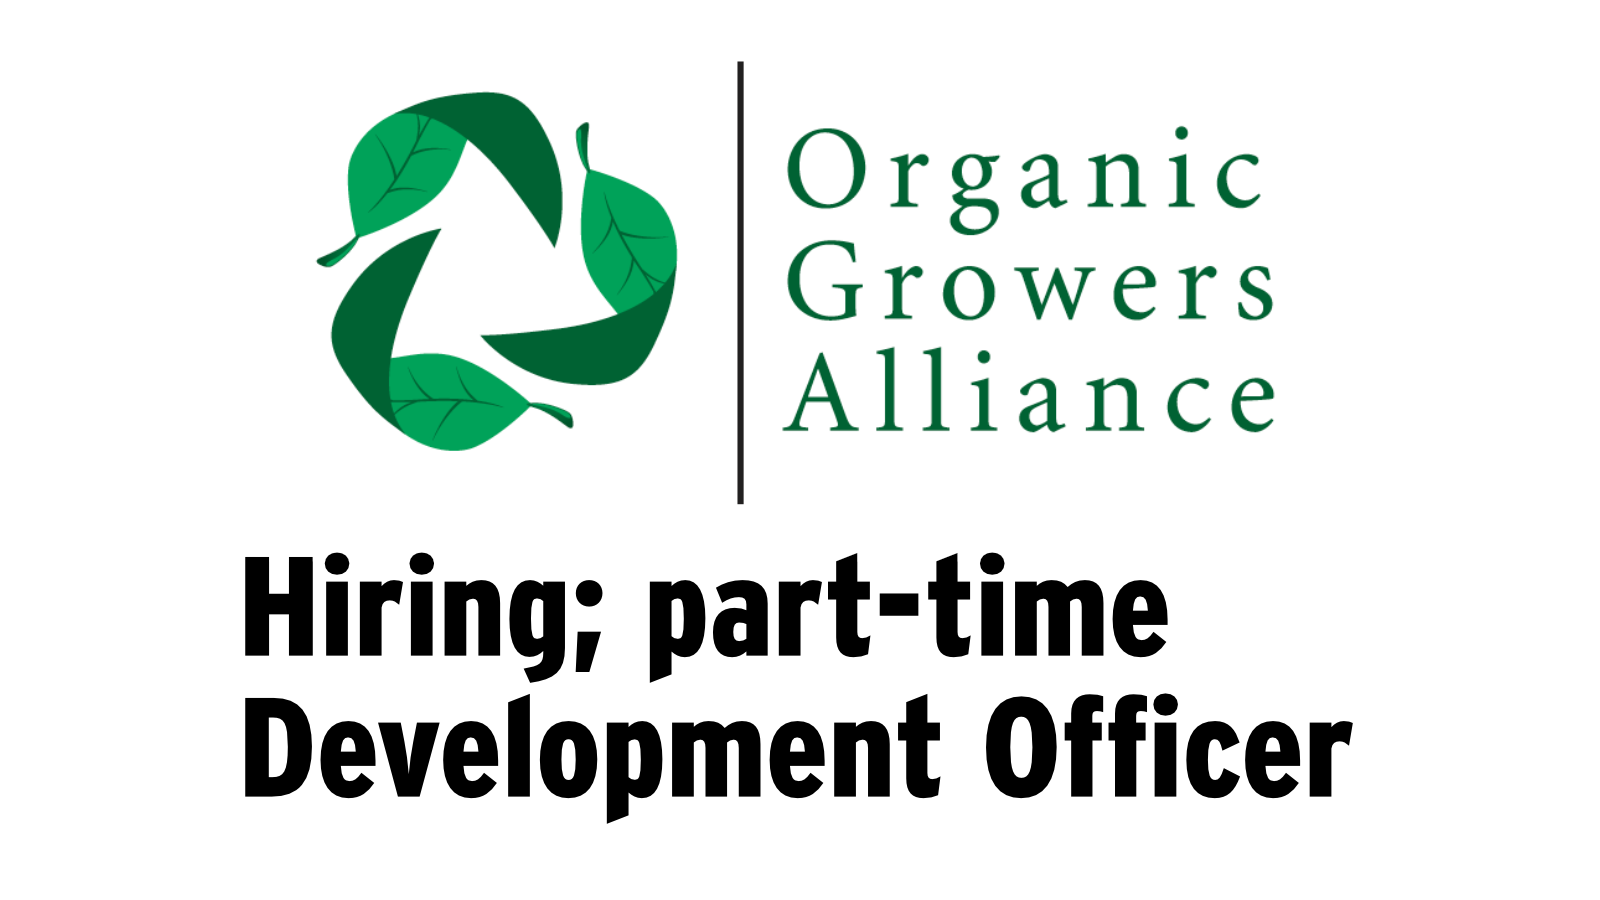 Organic Growers Alliance are hiring a part-time Development Officer – Closing date 22nd May 2022